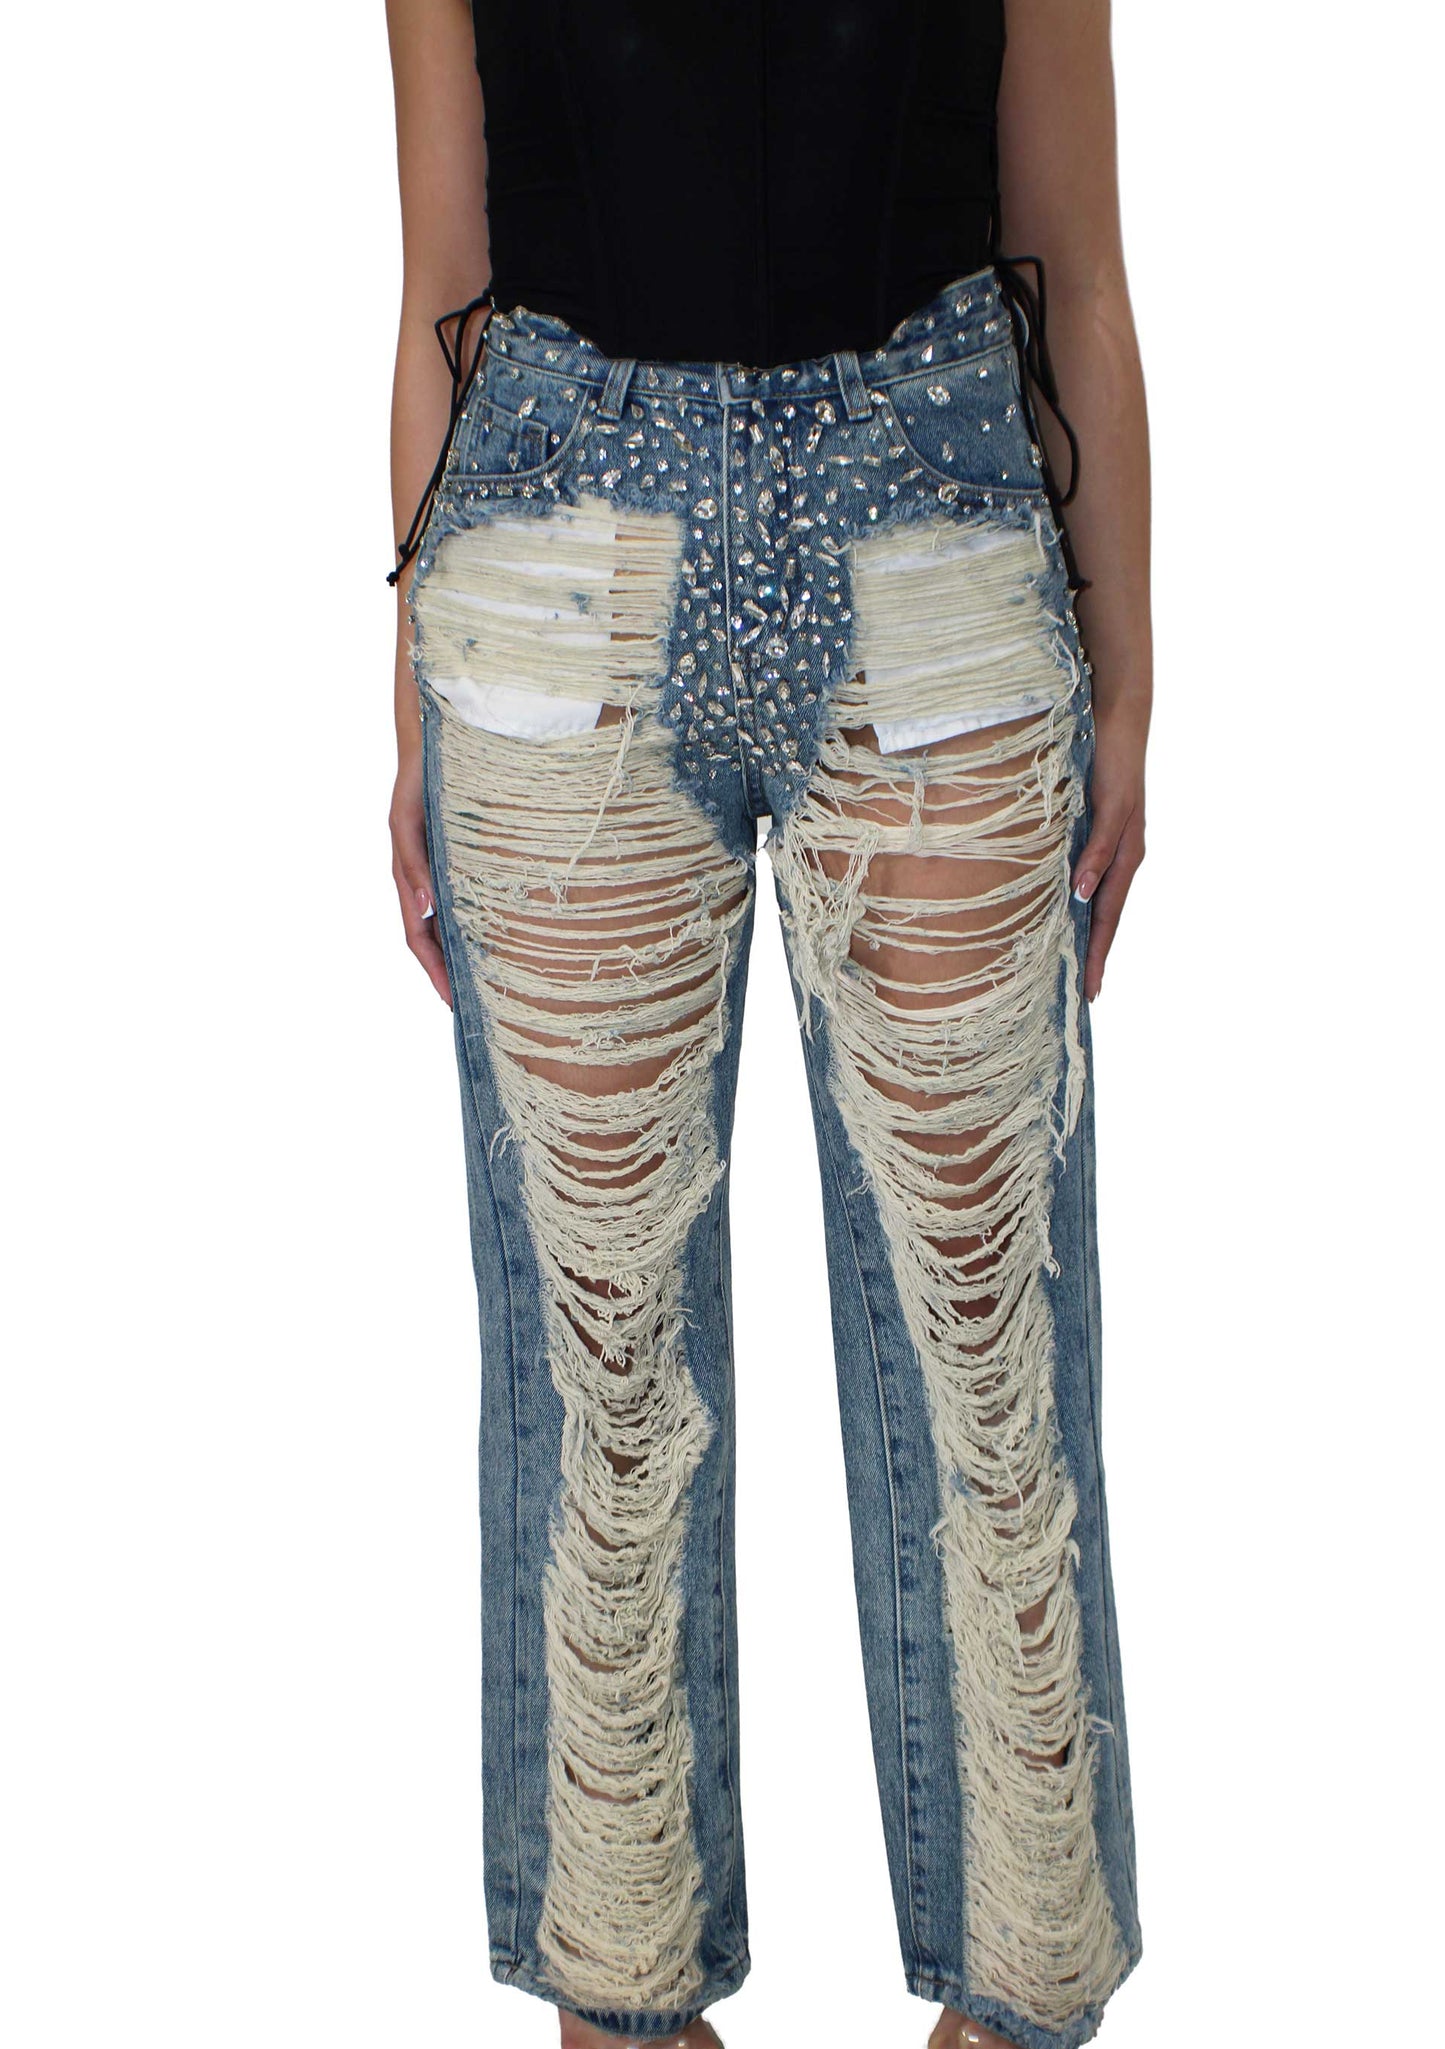 Tricia Bedazzled Jeans